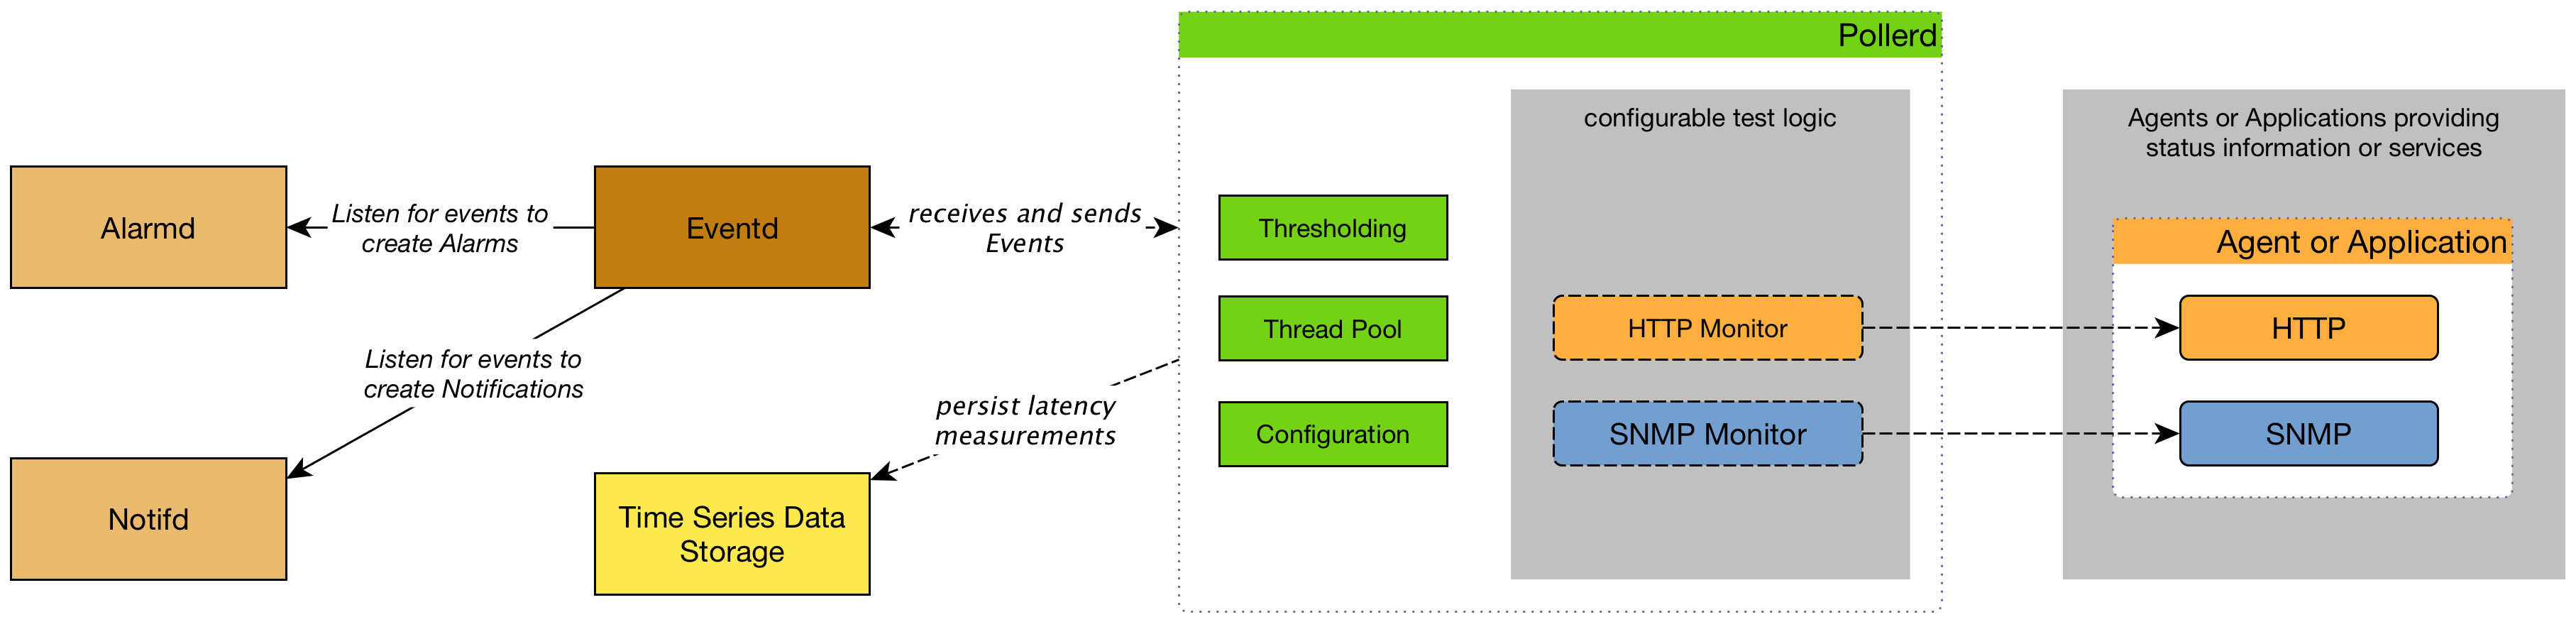 Network architecture diagram showing relationships between pollerd and Meridian components